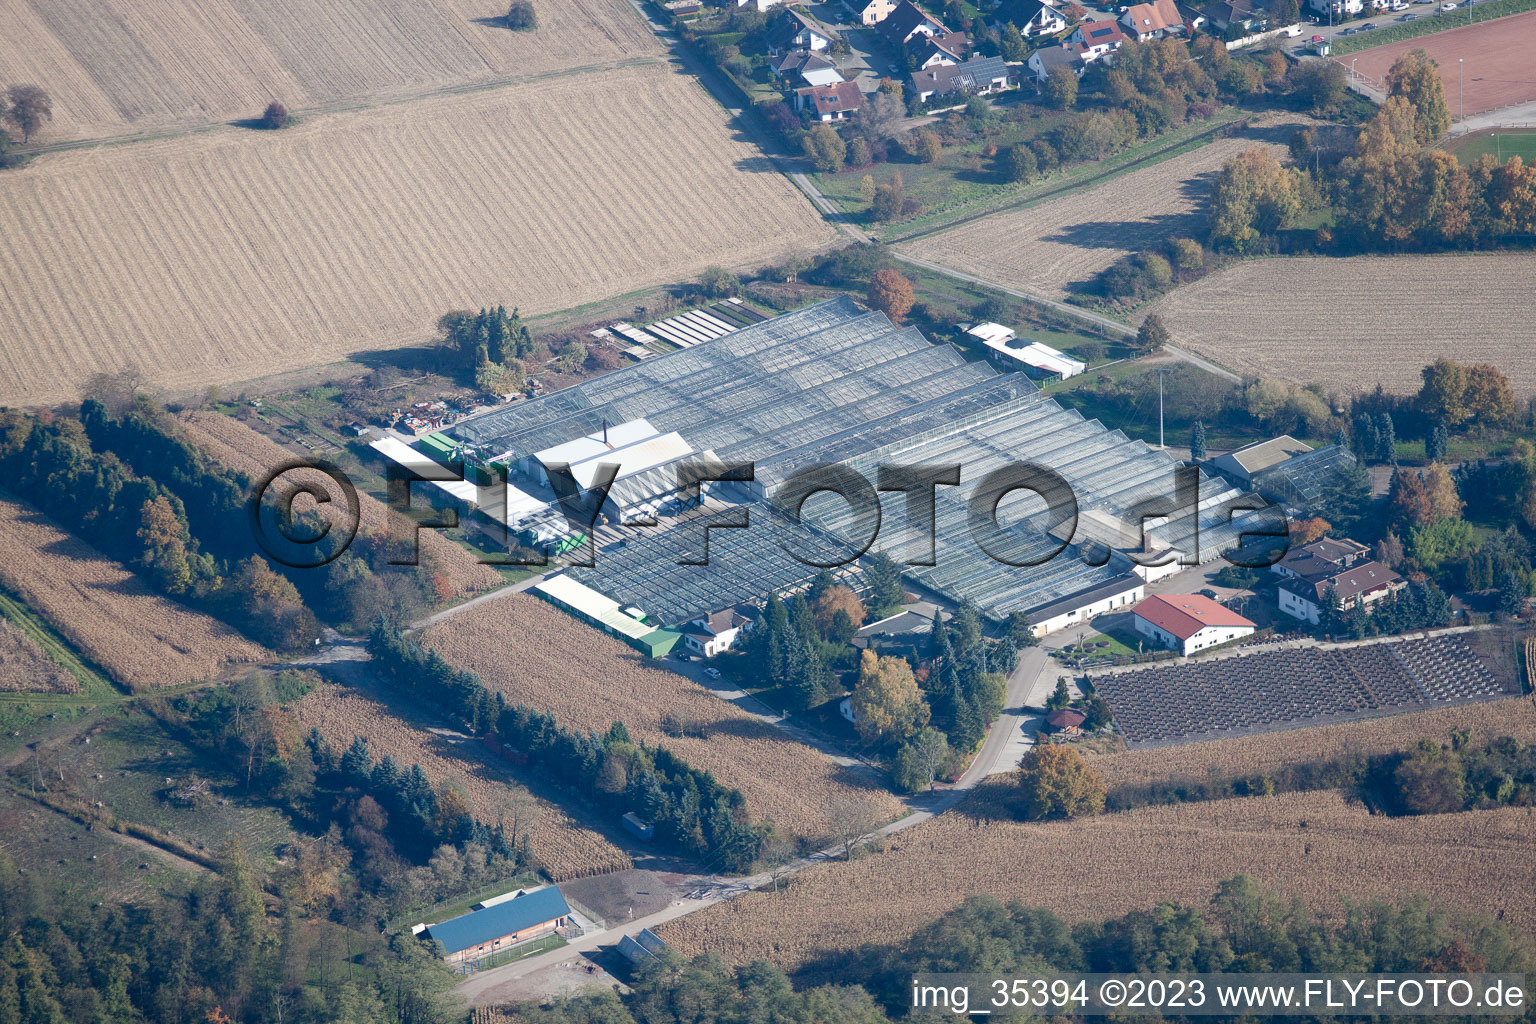 Geranium Endisch GmbH in Hagenbach in the state Rhineland-Palatinate, Germany from a drone